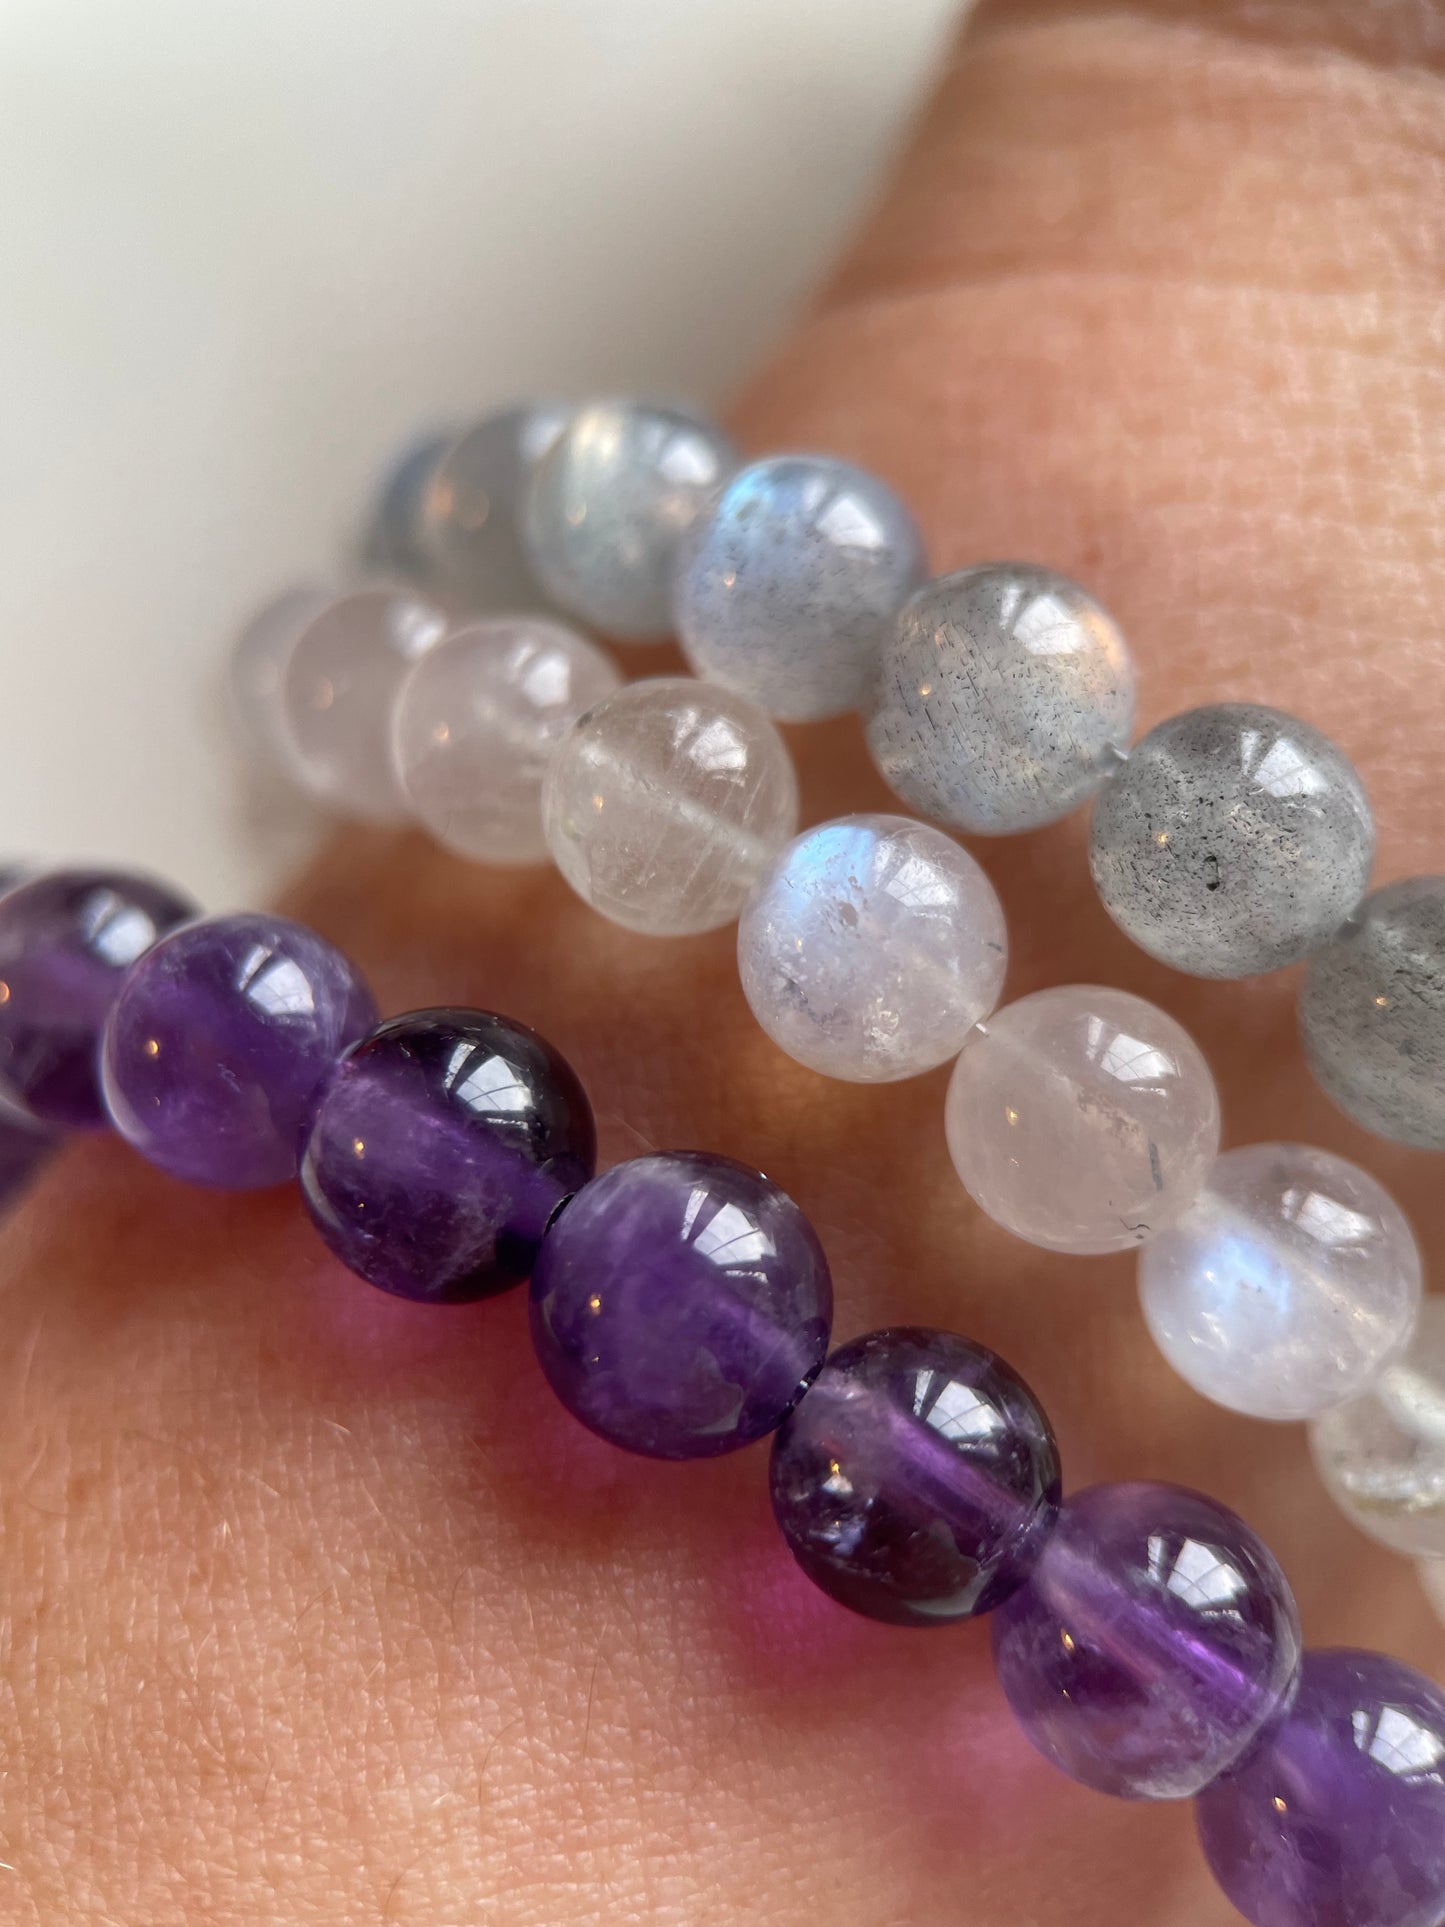 Full Moon - Moonstone bracelet for intuition, harmony and inner growth